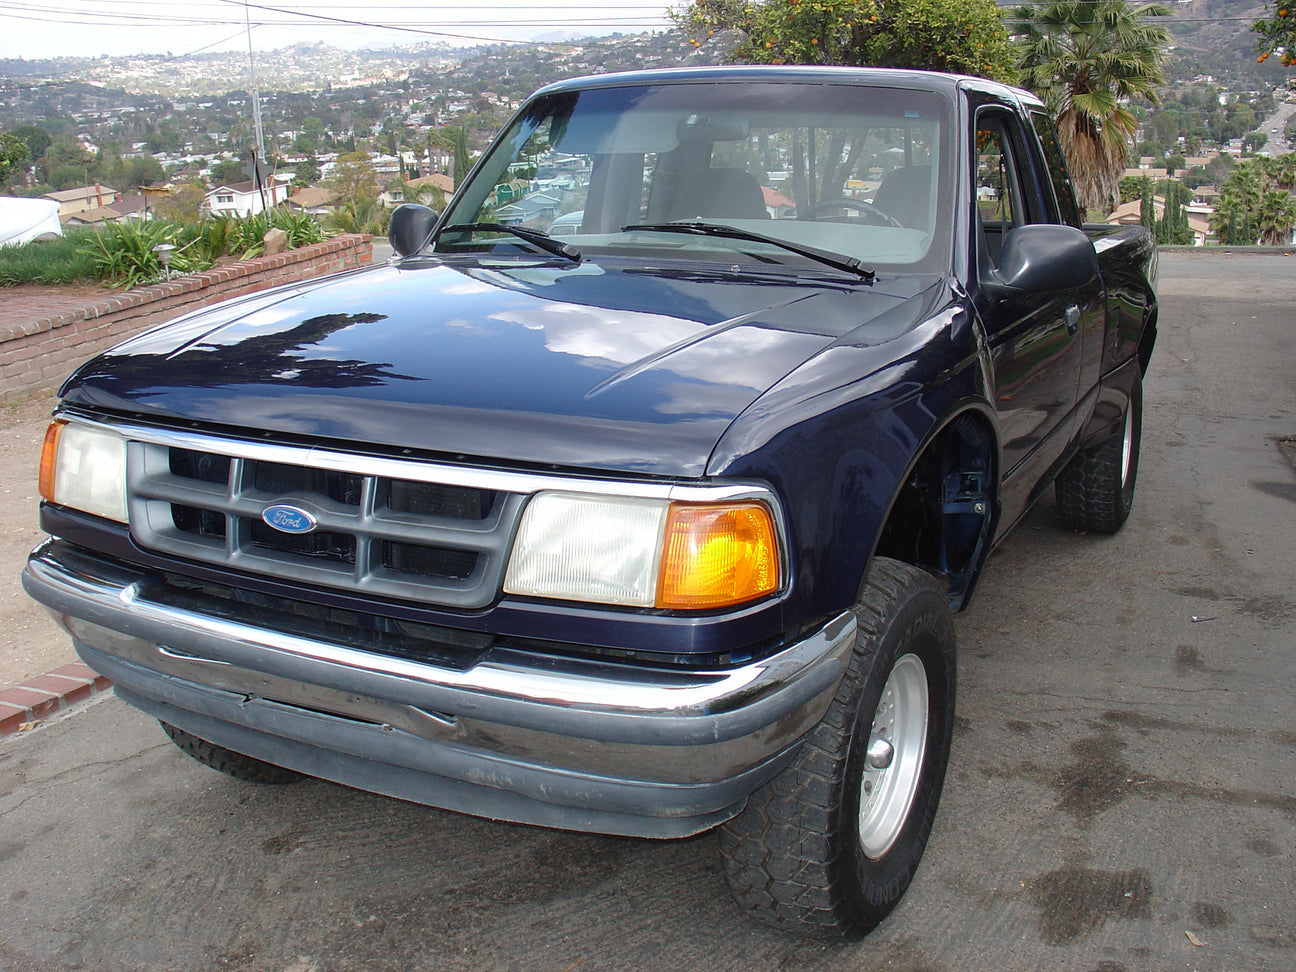 93-97 Ford Ranger 4.5" Bulge Off Road Fiberglass Fenders - Memorial Day Sale Up To 50% OFF!